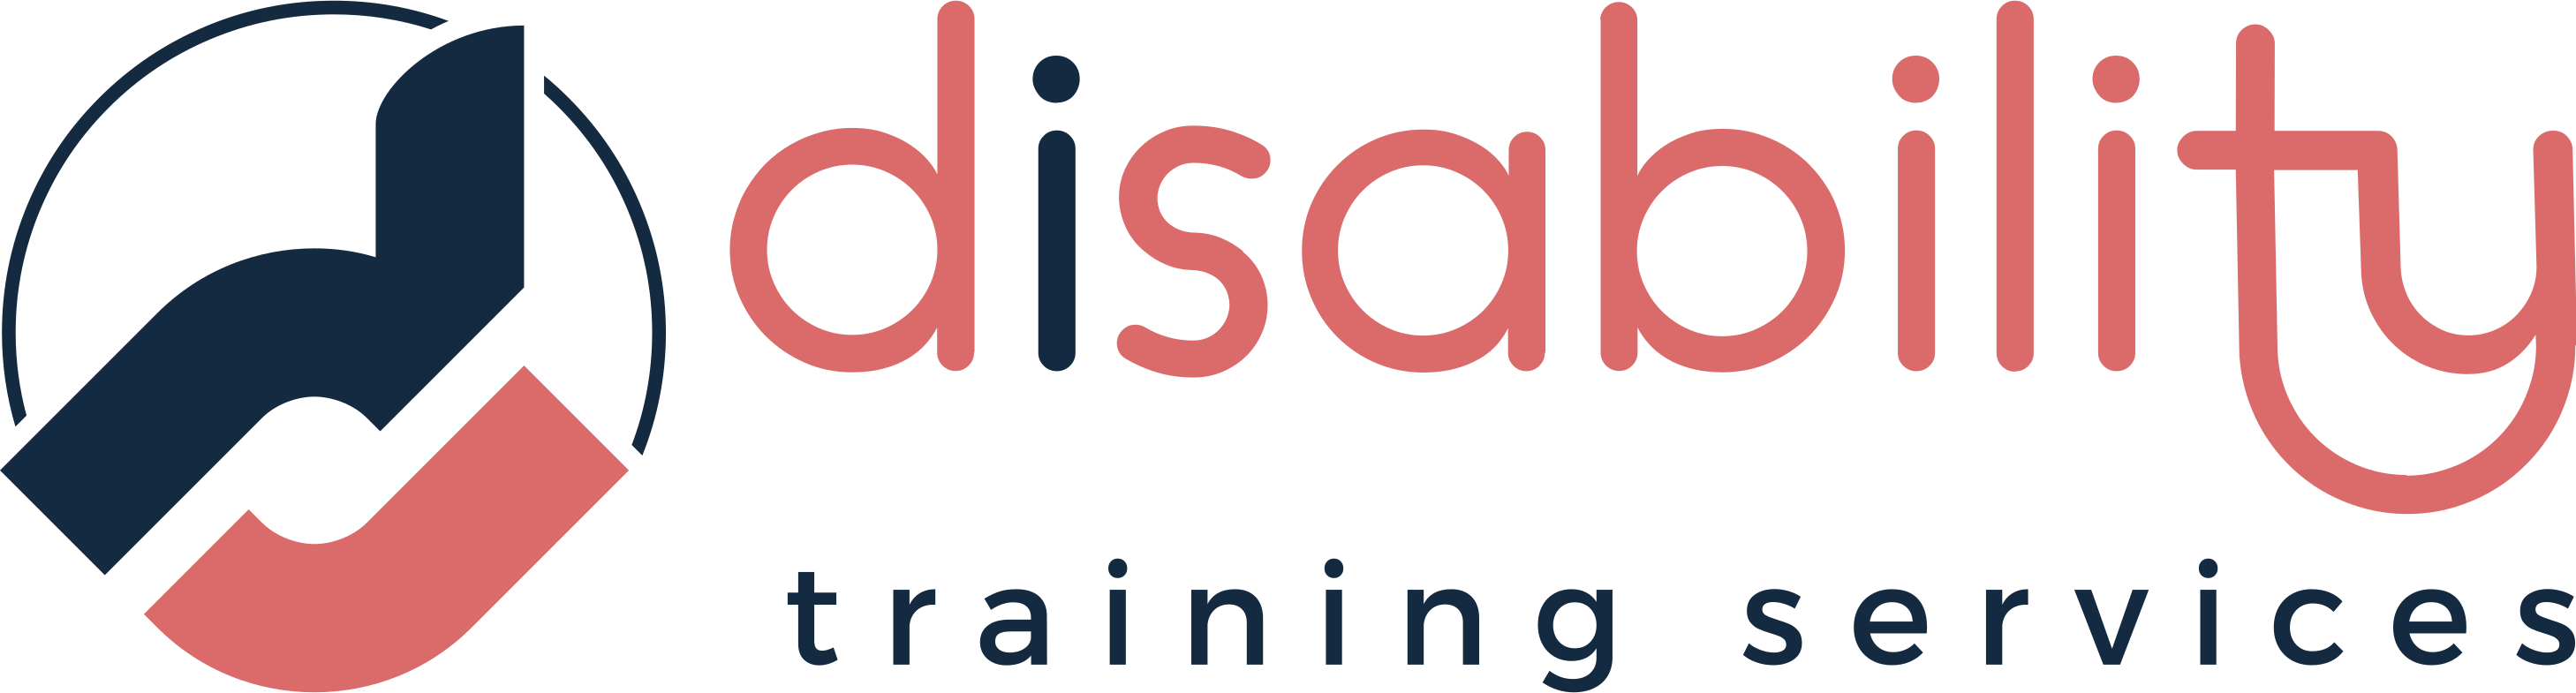 Disability Training Services Logo